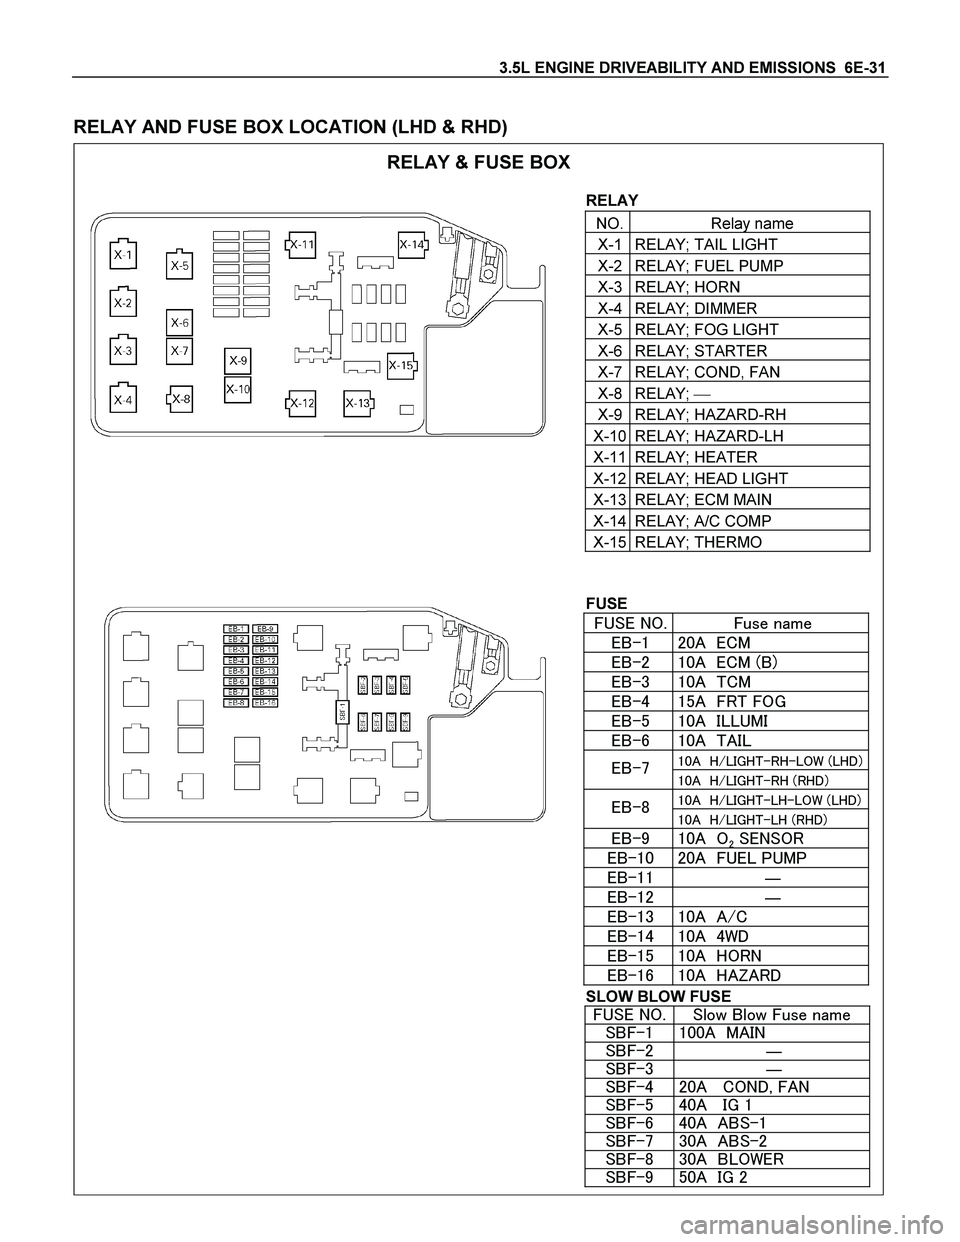 ISUZU TF SERIES 2004  Workshop Manual 3.5L ENGINE DRIVEABILITY AND EMISSIONS  6E-31 
 
RELAY AND FUSE BOX LOCATION (LHD & RHD) 
 RELAY & FUSE BOX 
 
RELAY 
NO. Relay name 
X-1 RELAY; TAIL LIGHT 
X-2 RELAY; FUEL PUMP 
X-3 RELAY; HORN 
X-4 